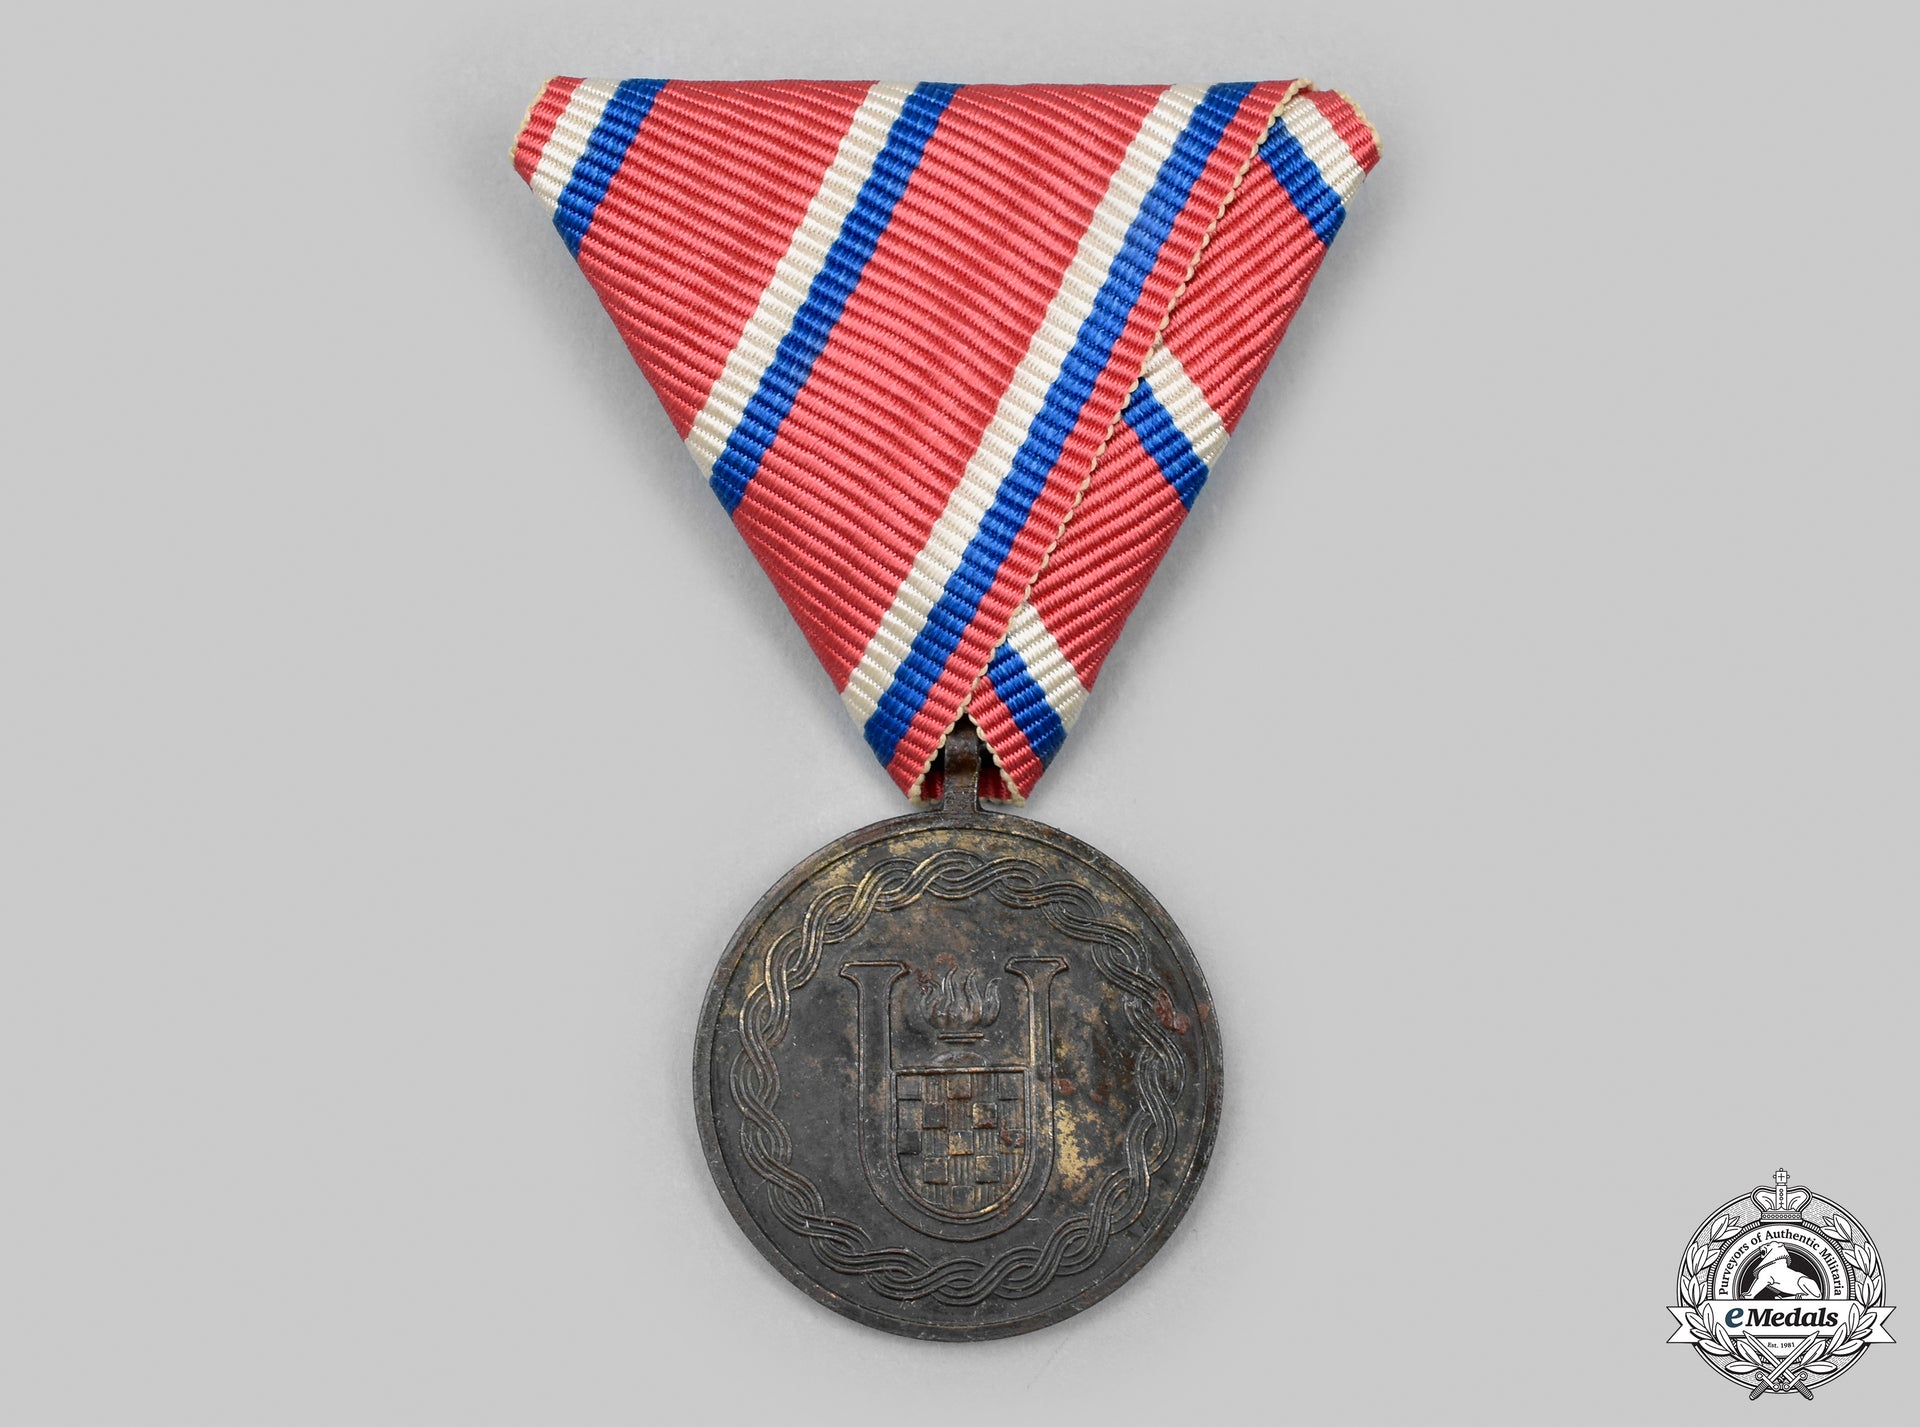 croatia,_independent_state._a_medal_for_the_twenty-_fifth_anniversary_of_croatian_independence1918-1943_cic_2021_173_mnc9756_1_1